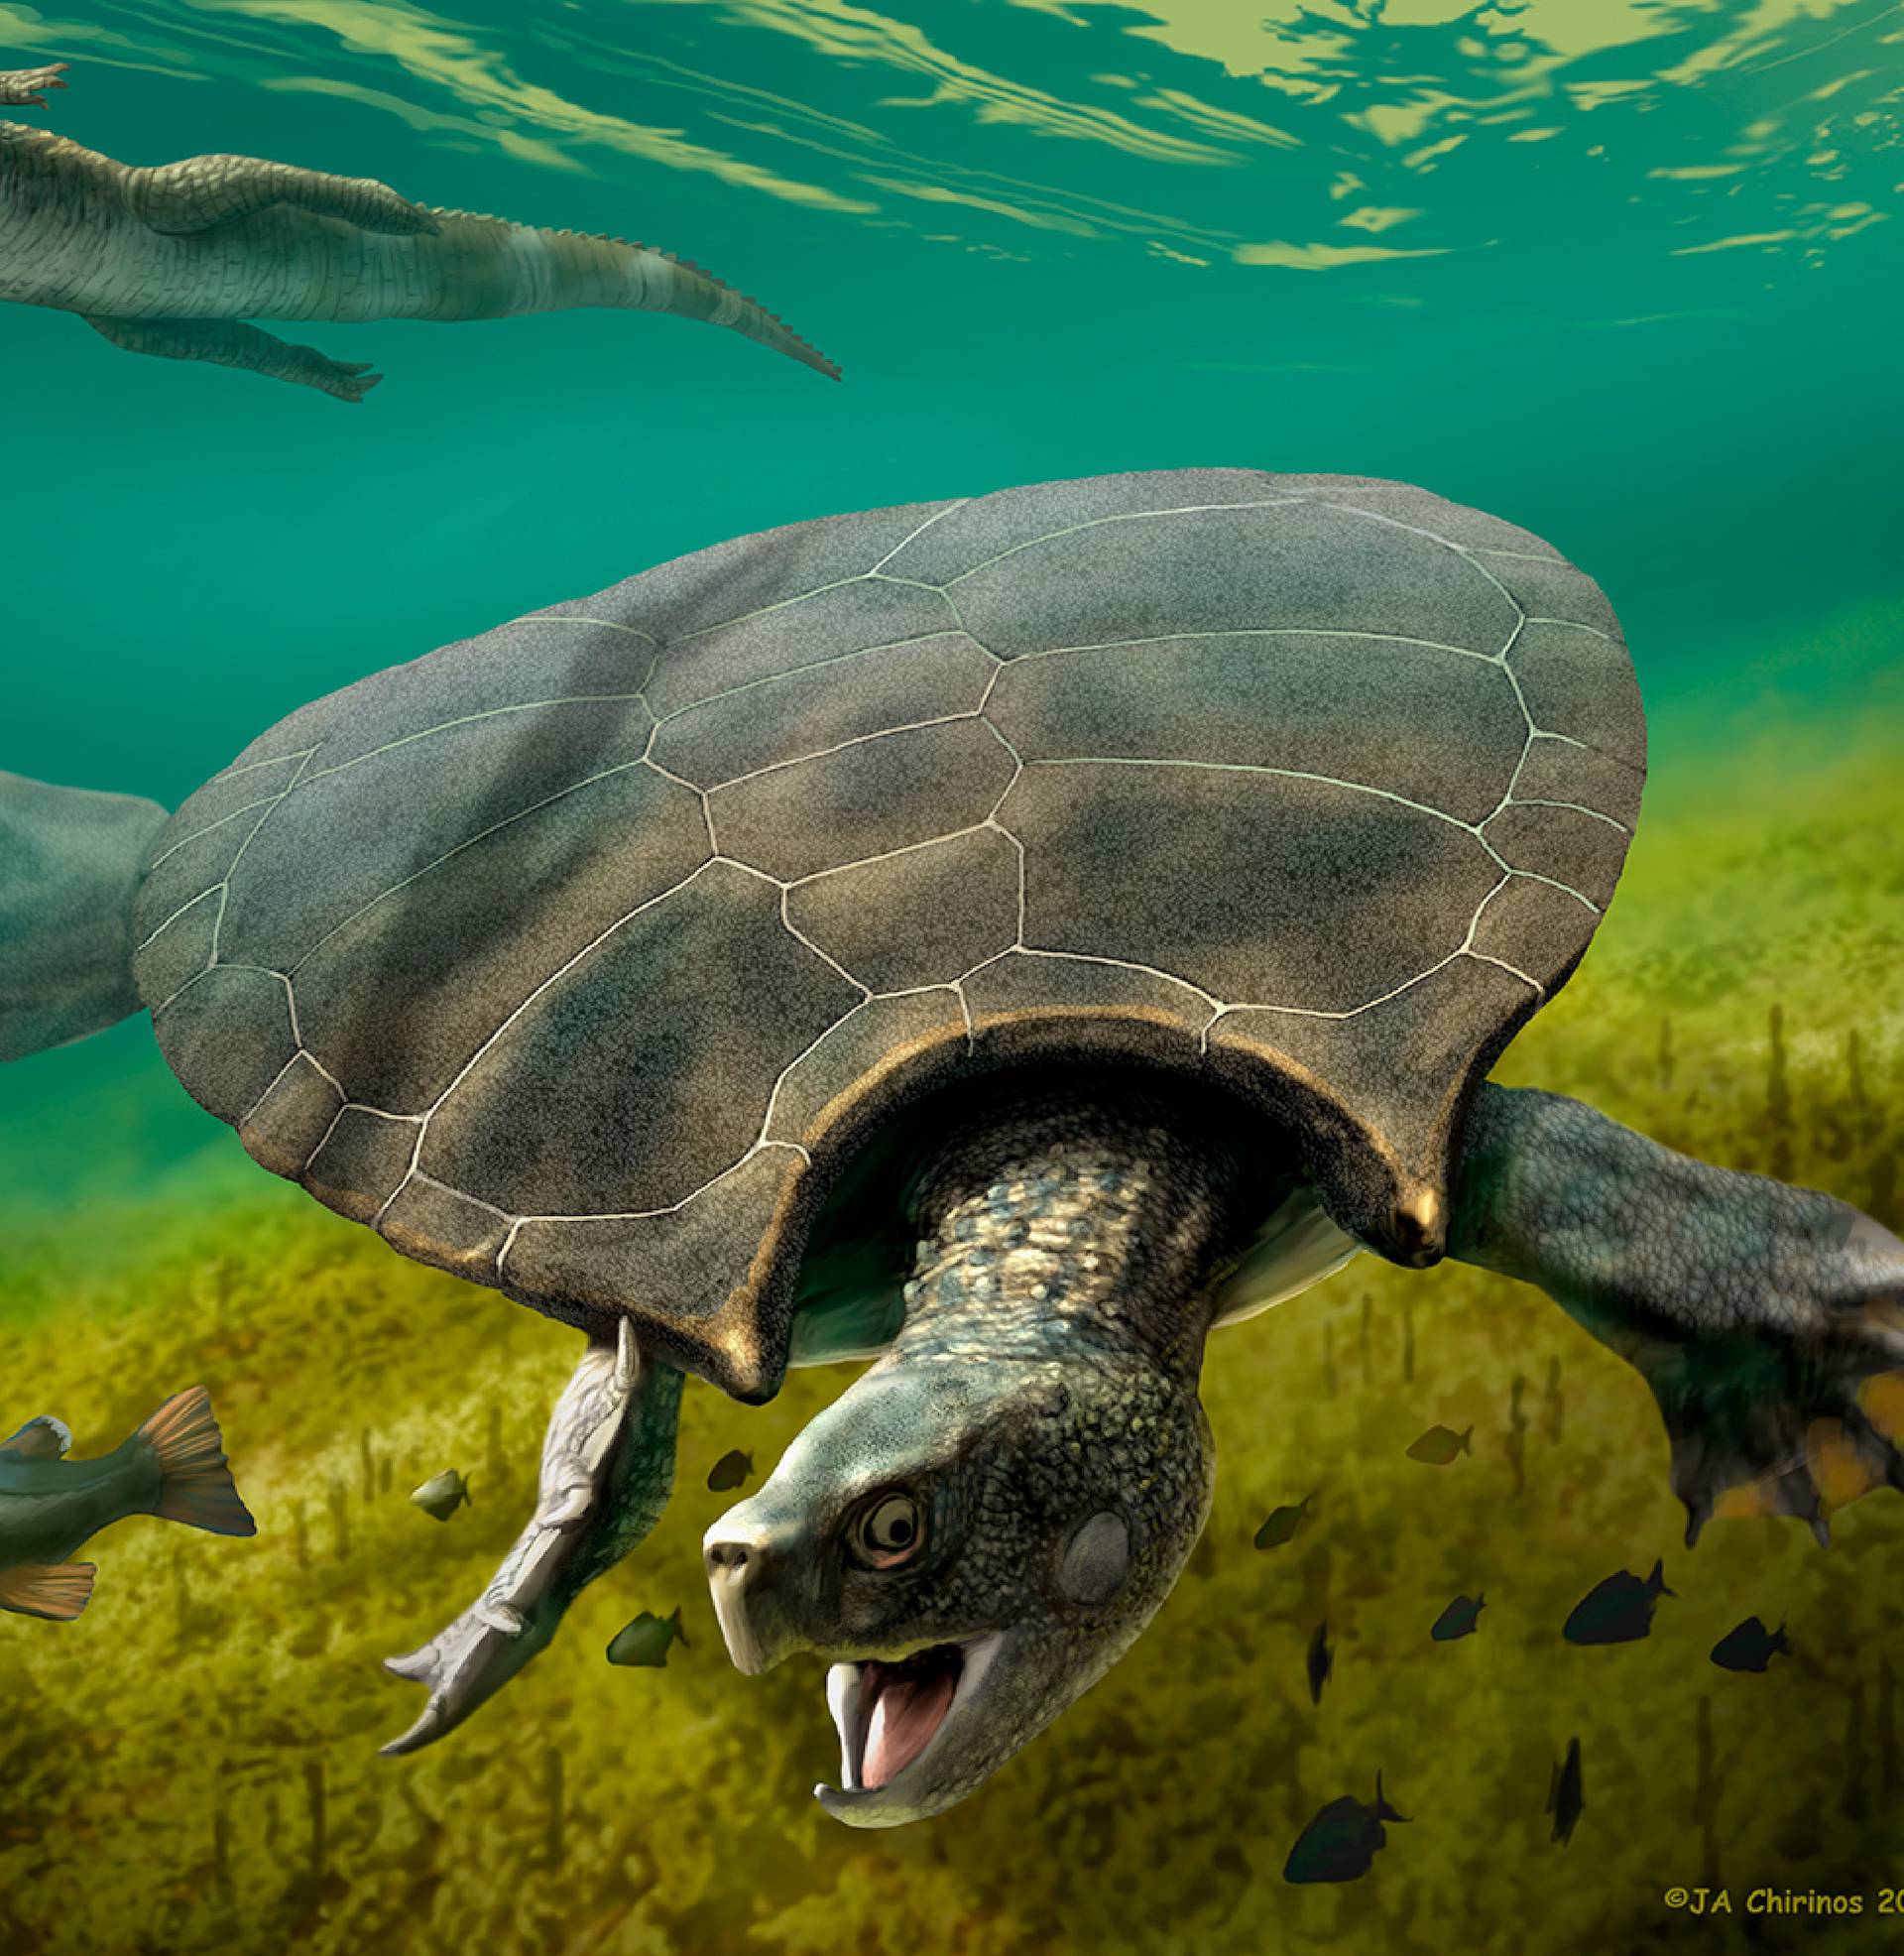 The huge extinct freshwater turtle Stupendemys geographicus, that lived in lakes and rivers in northern South America during the Miocene Epoch, is seen in an illustration